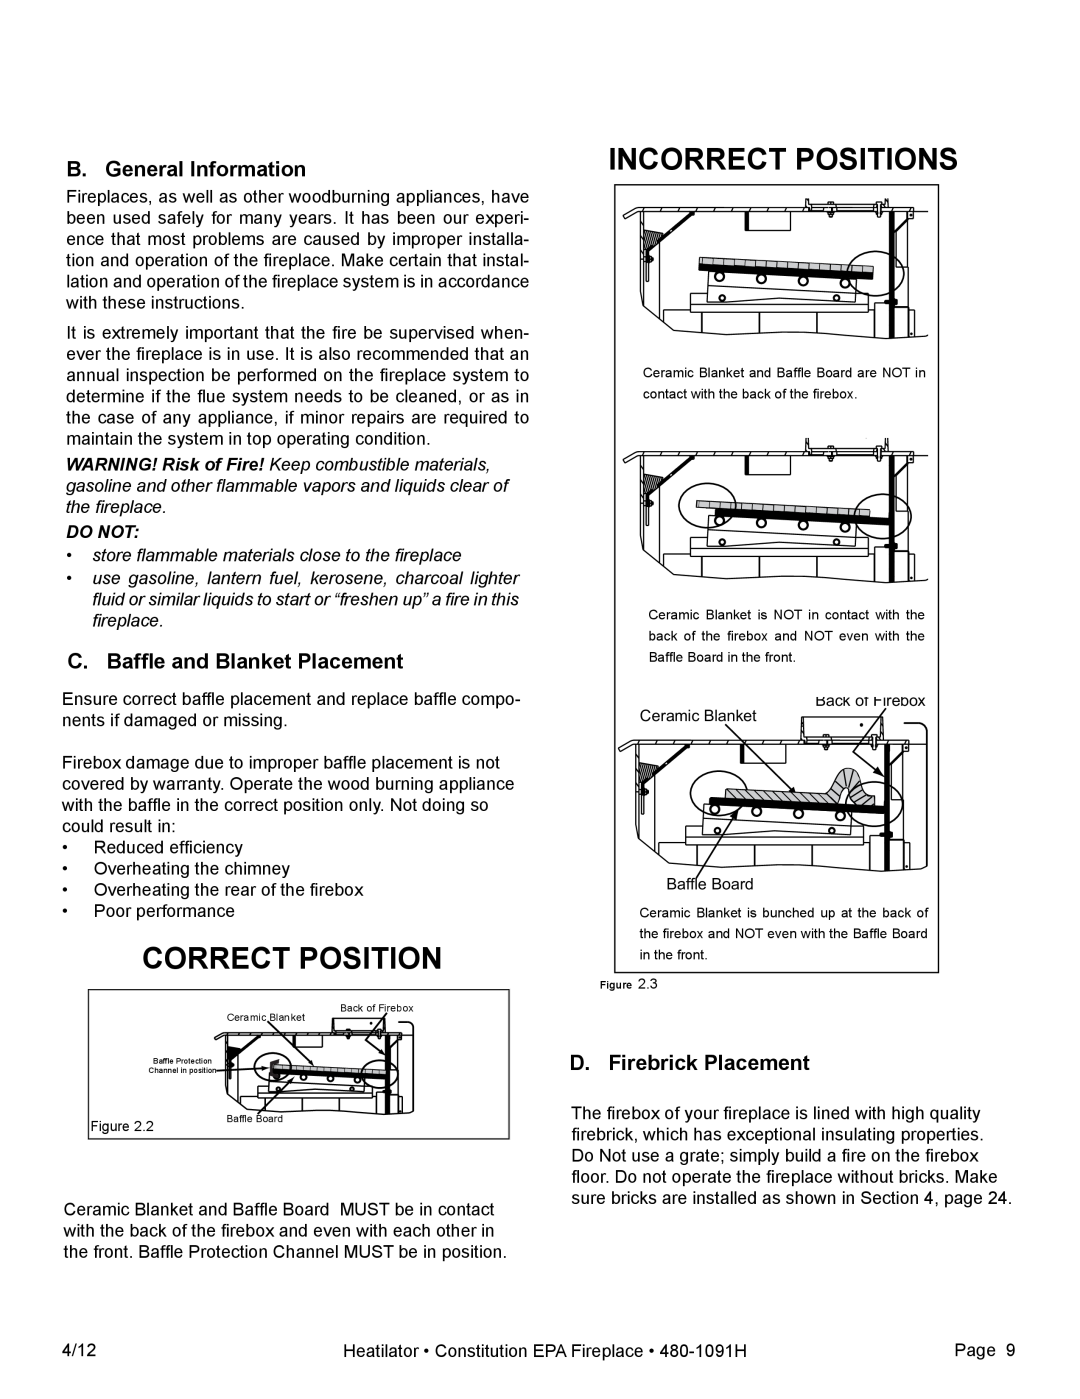 Heatiator C40 Incorrect Positions, Correct Position, B. General Information, C.Baffle and Blanket Placement, Do NOT 